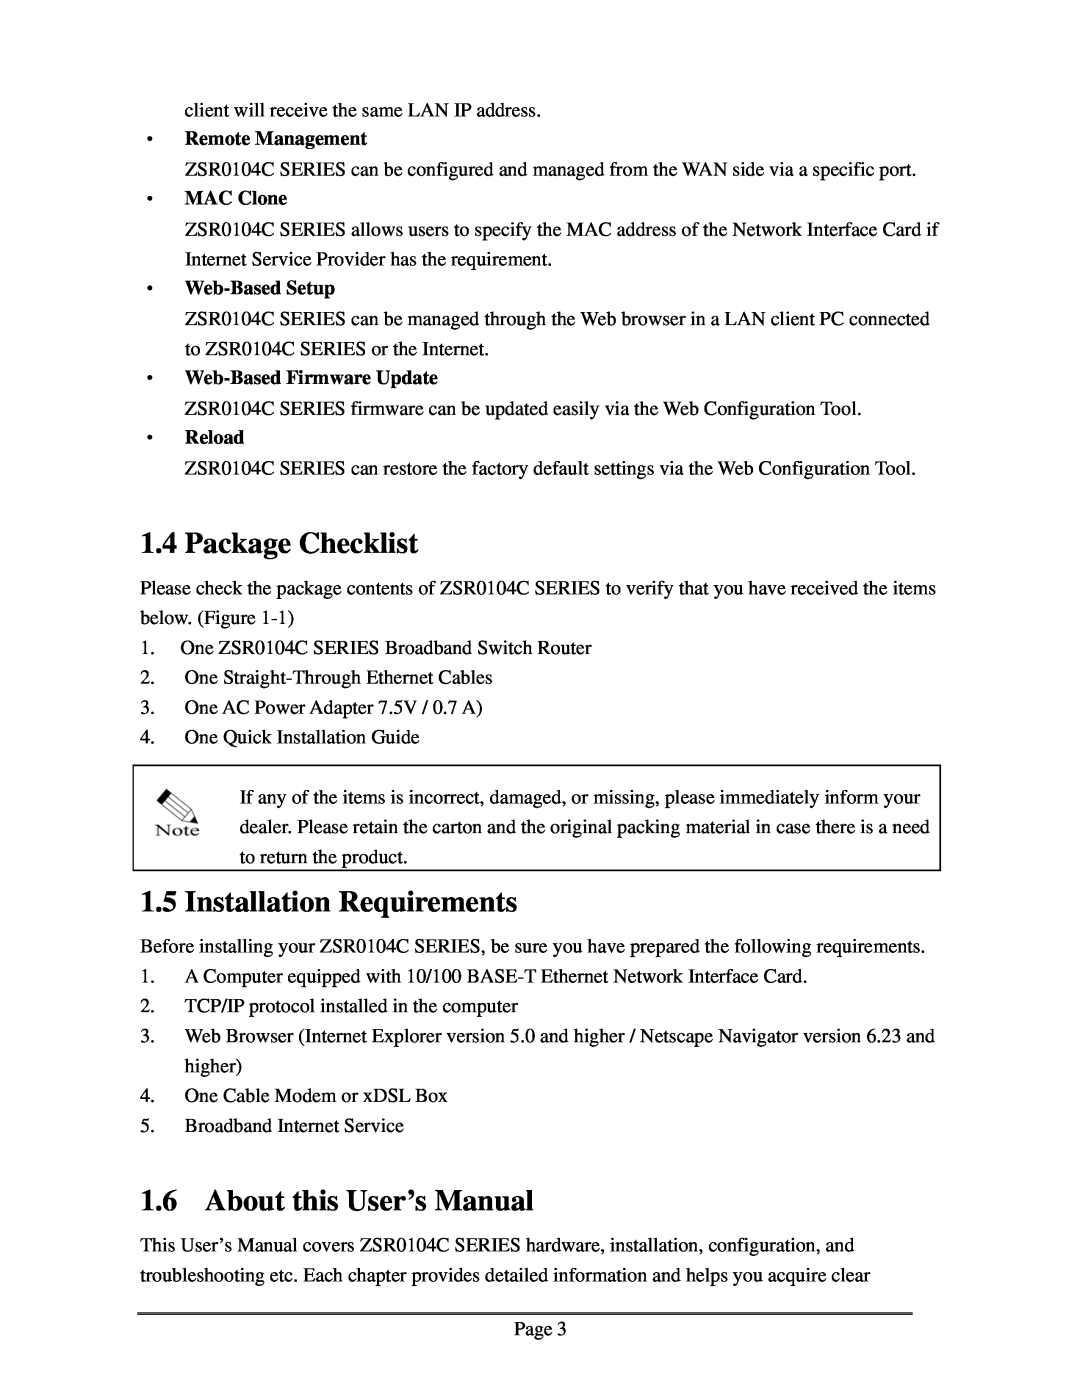 Zonet Technology ZSR0104C Series Package Checklist, Installation Requirements, About this User’s Manual, ‧ MAC Clone 